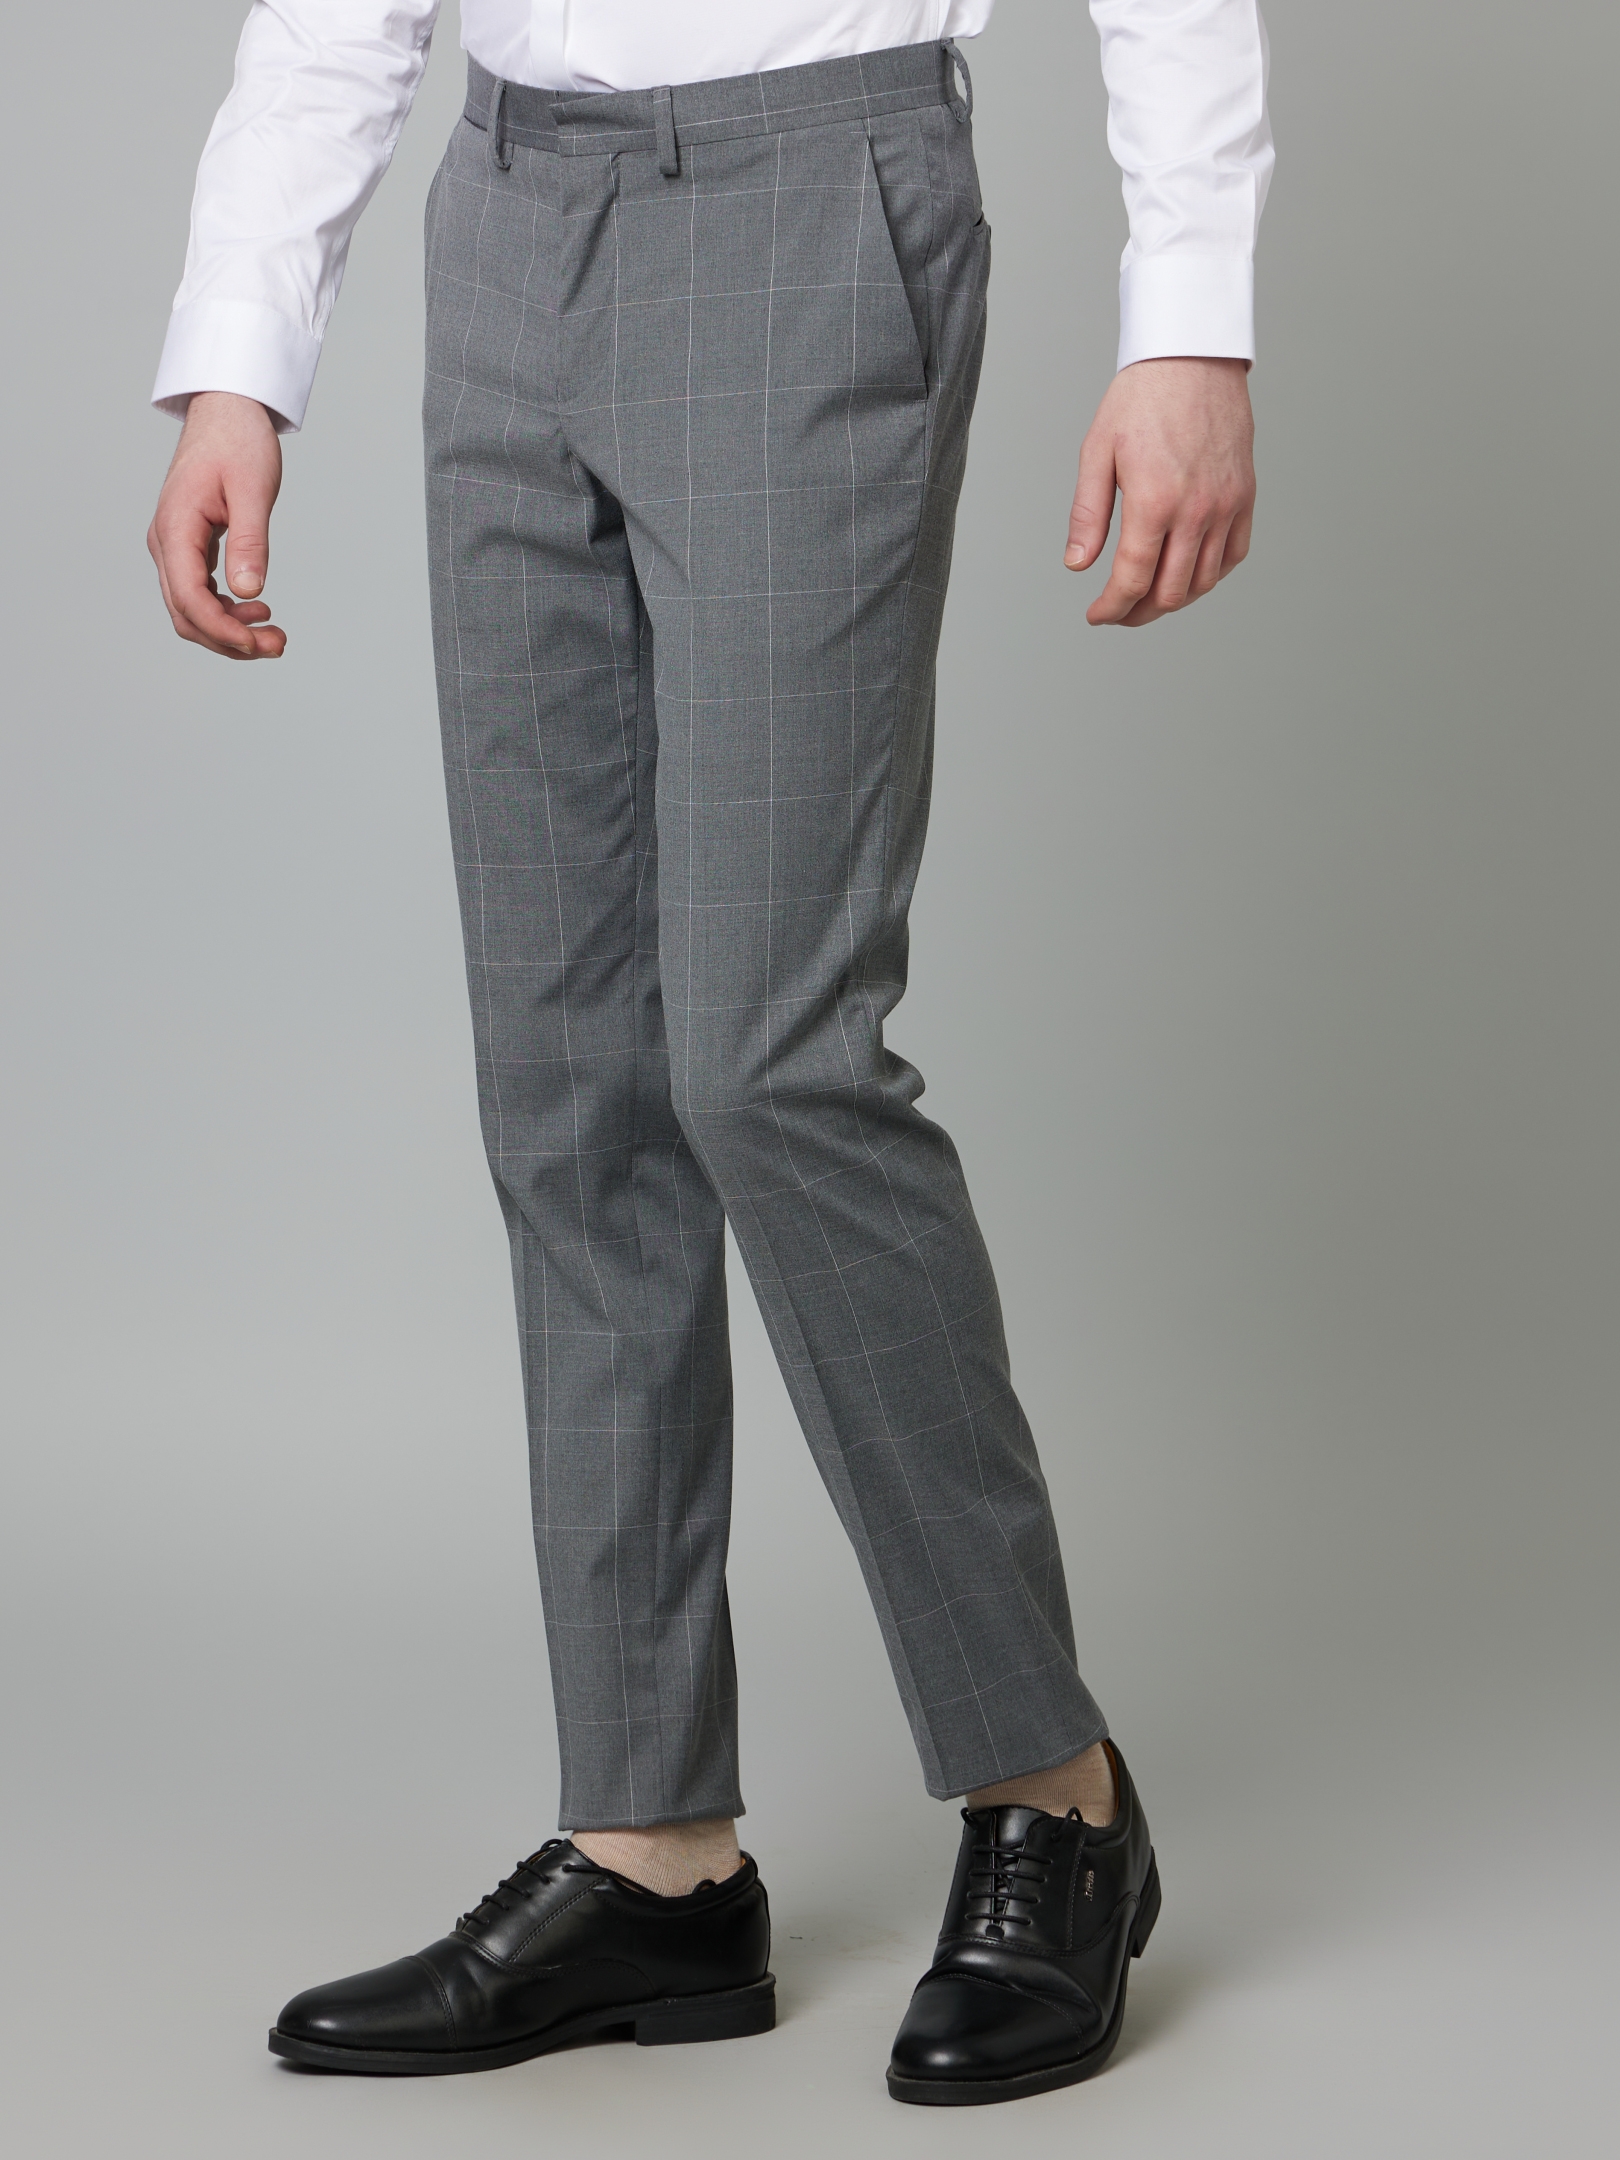 Men's Grey Polyester Checked Formal Trousers